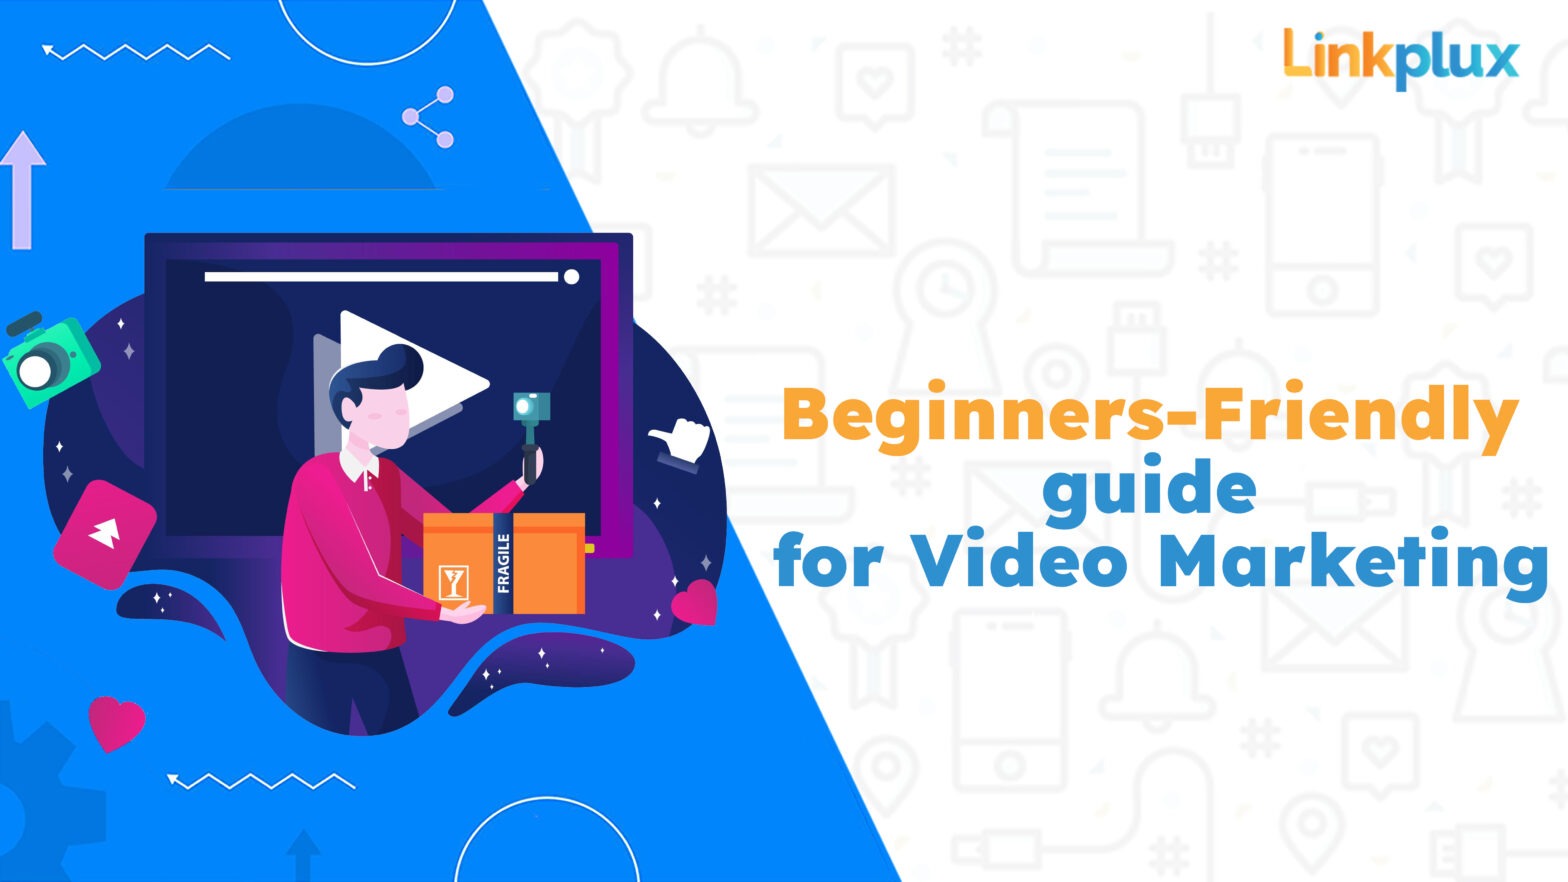 Guide for video marketing